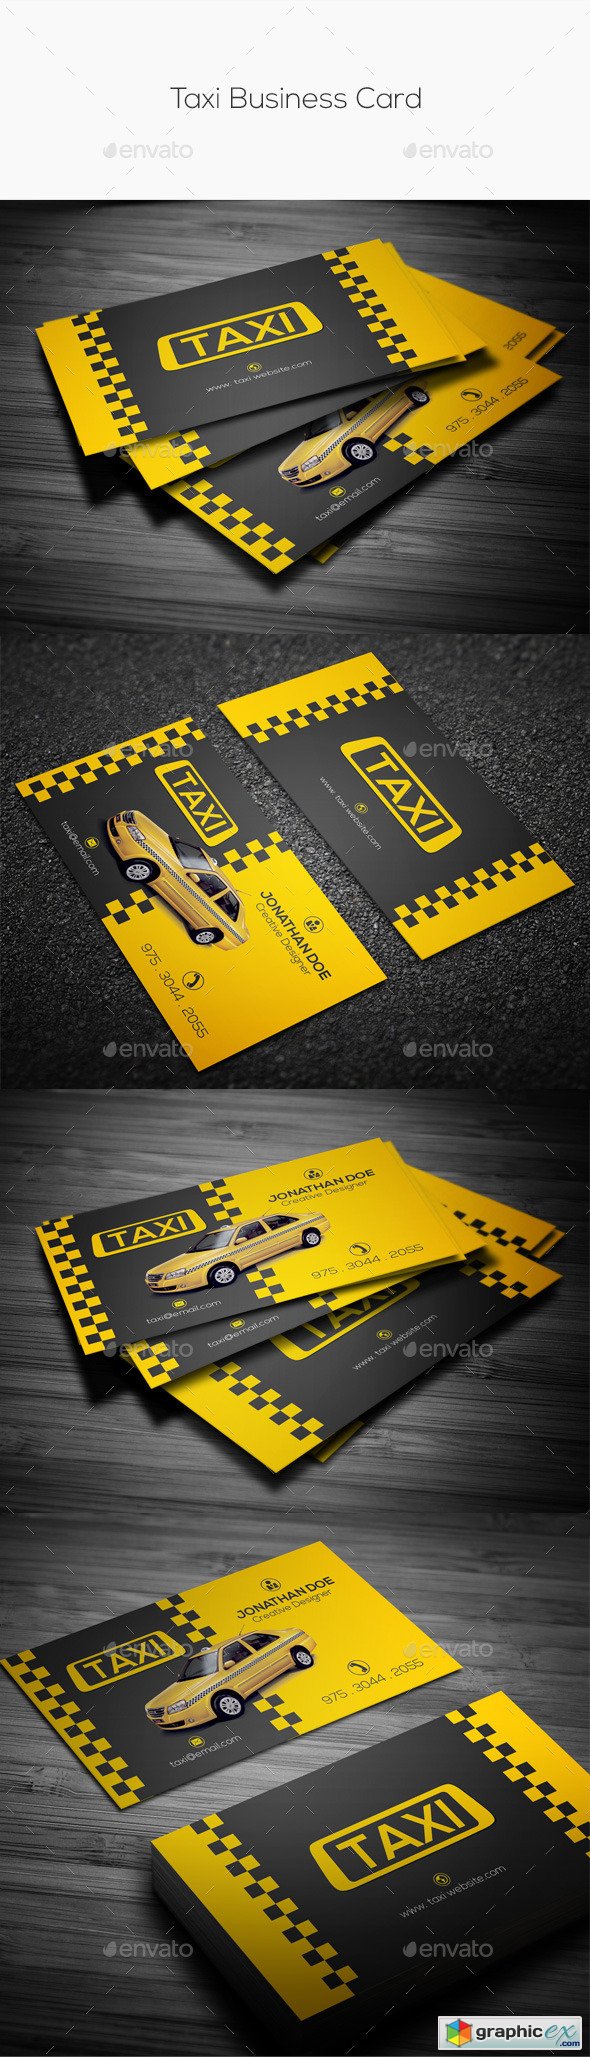 Taxi Business Card 11051930